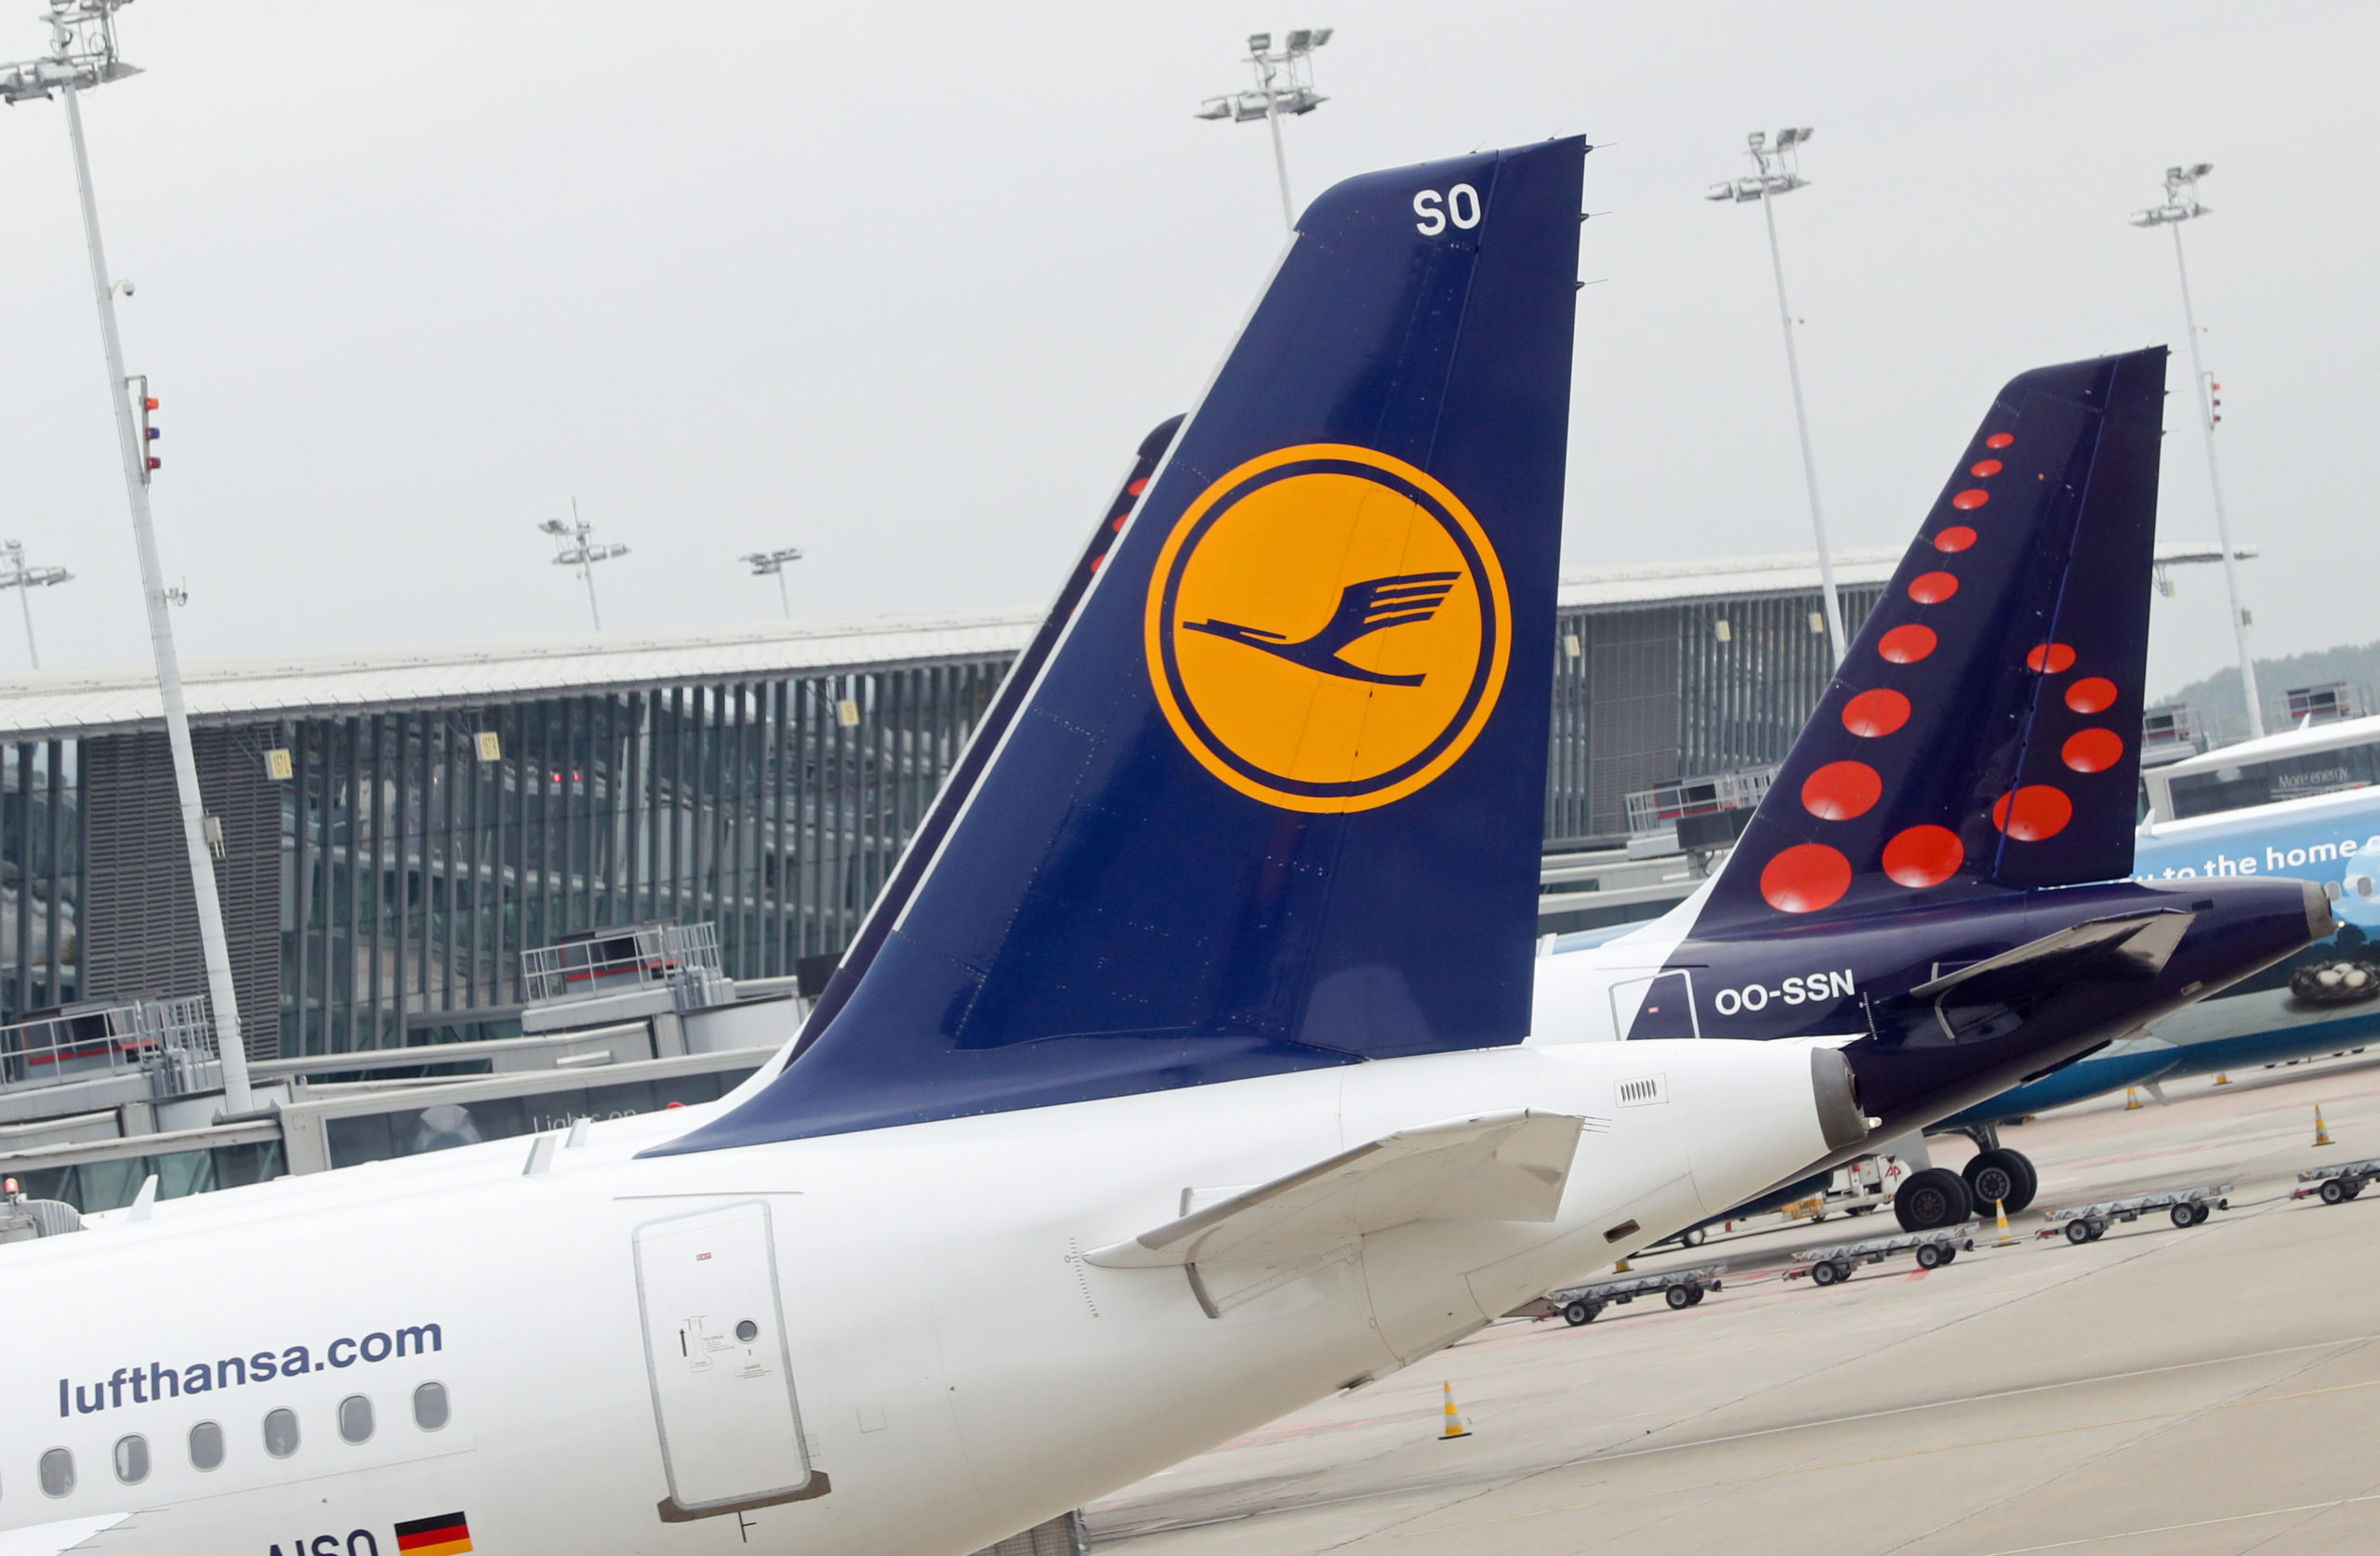 Agreement with Lufthansa saves Brussels Airlines